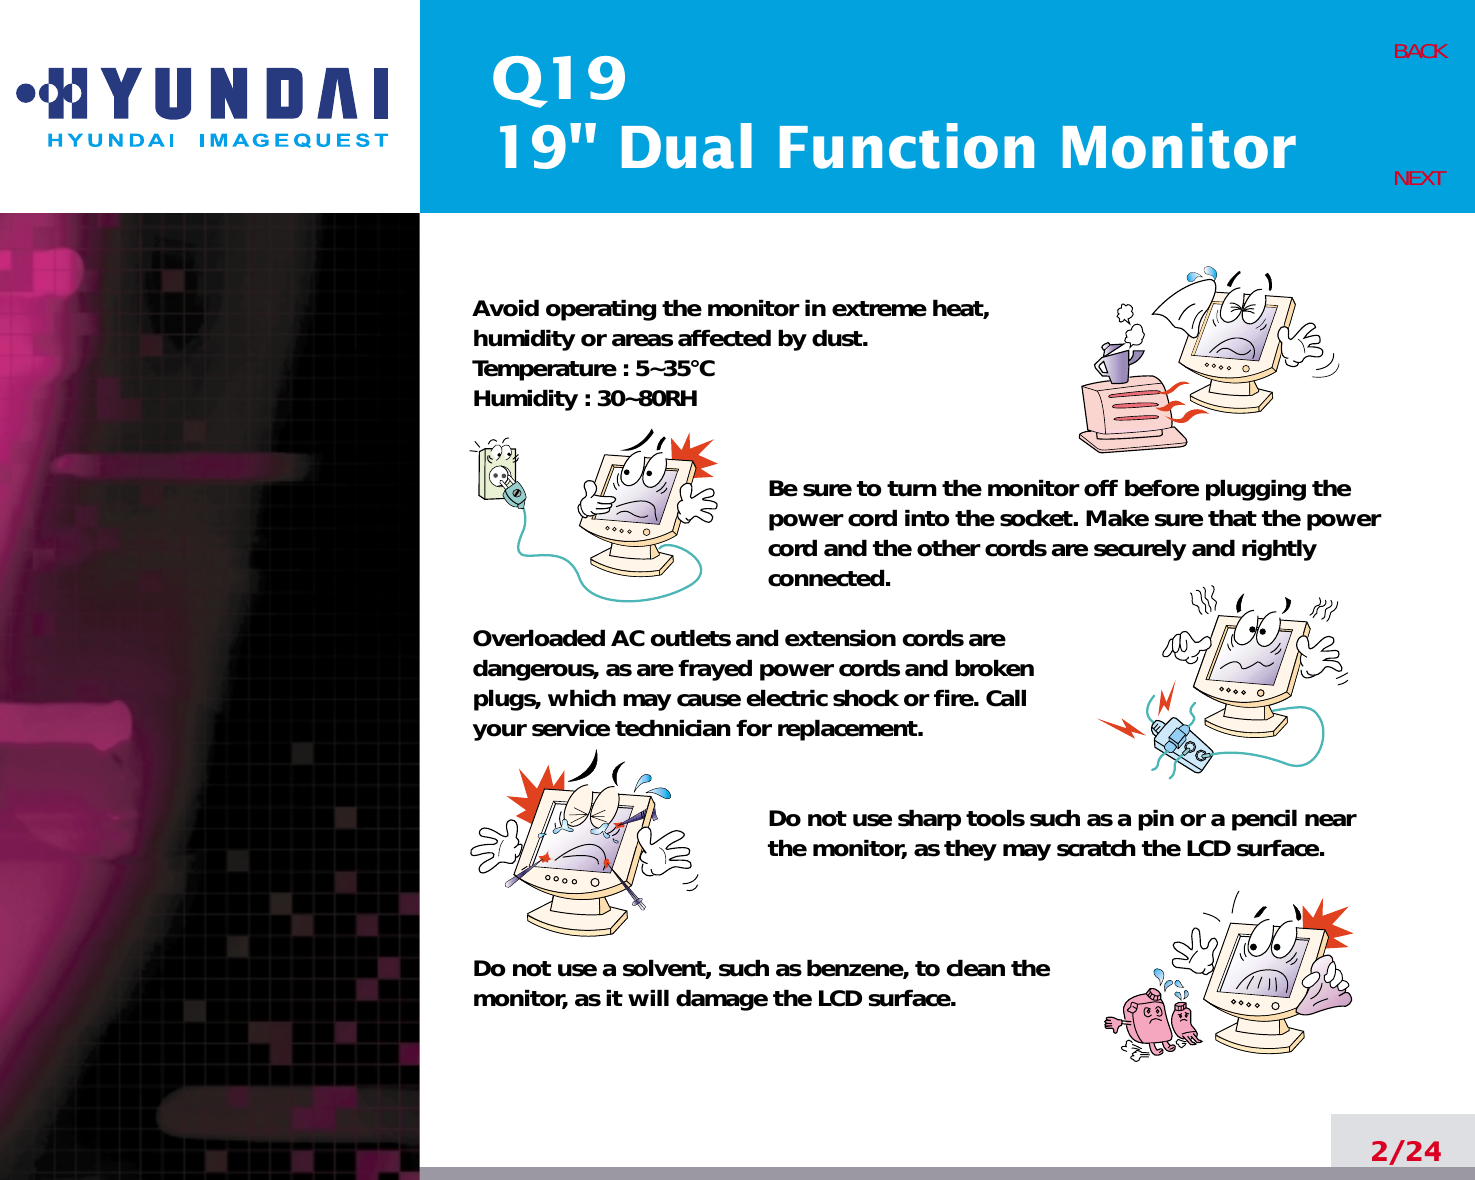 Q1919&quot; Dual Function Monitor2/24BACKNEXTAvoid operating the monitor in extreme heat, humidity or areas affected by dust. Temperature : 5~35°CHumidity : 30~80RH Be sure to turn the monitor off before plugging thepower cord into the socket. Make sure that the powercord and the other cords are securely and rightlyconnected.Overloaded AC outlets and extension cords are dangerous, as are frayed power cords and broken plugs, which may cause electric shock or fire. Call your service technician for replacement.Do not use sharp tools such as a pin or a pencil near the monitor, as they may scratch the LCD surface.Do not use a solvent, such as benzene, to clean the monitor, as it will damage the LCD surface.